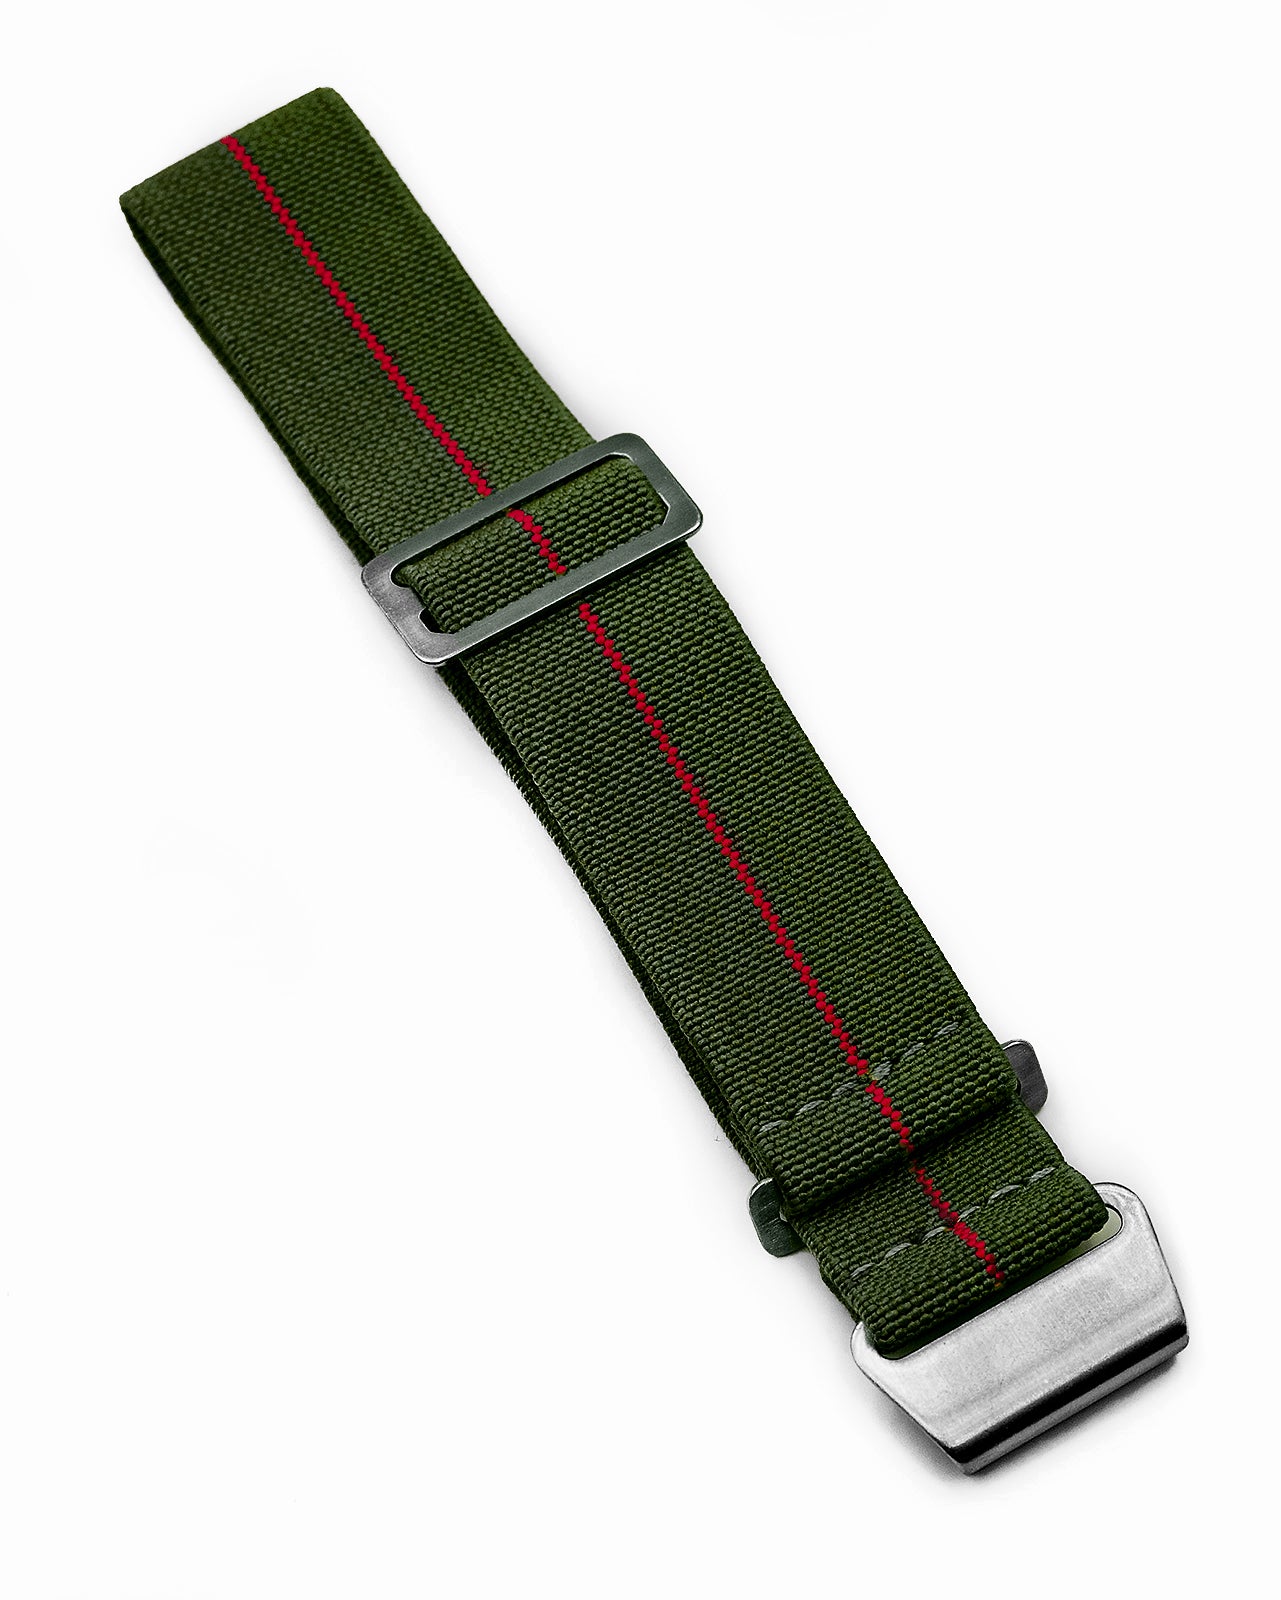 PARA Elastic - Olive Green with Red Centerline